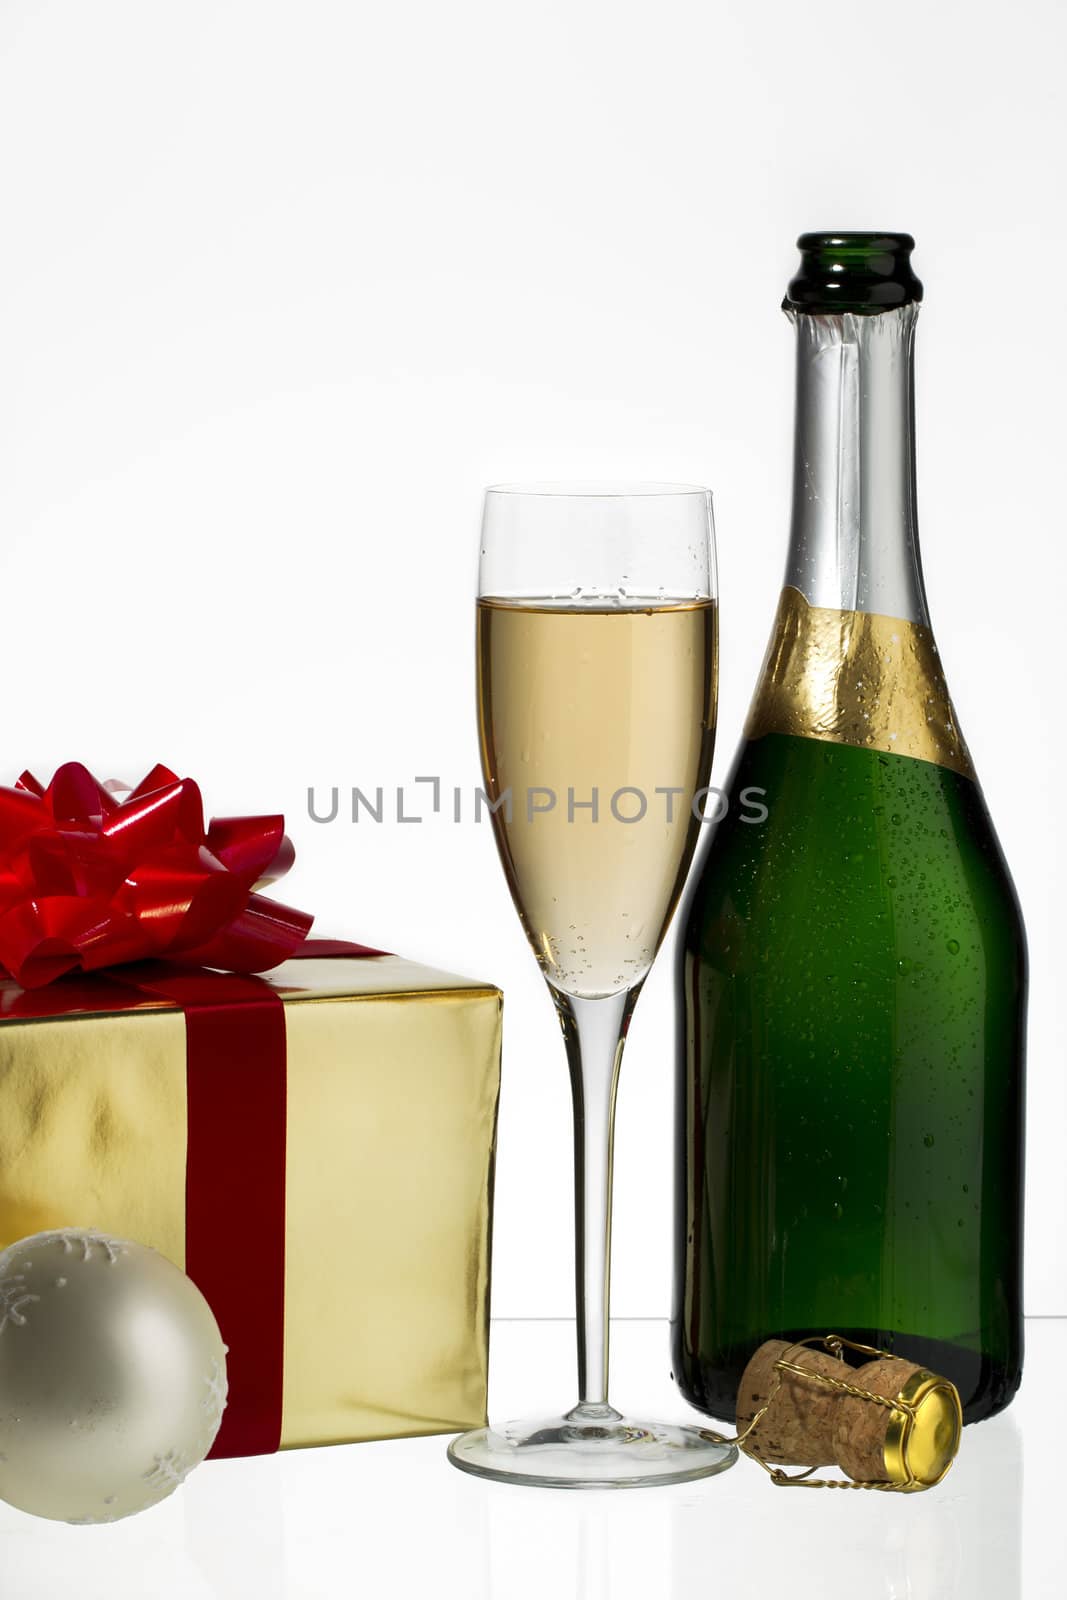 Champagne flute and bottle with Christmas gift and cork on white background